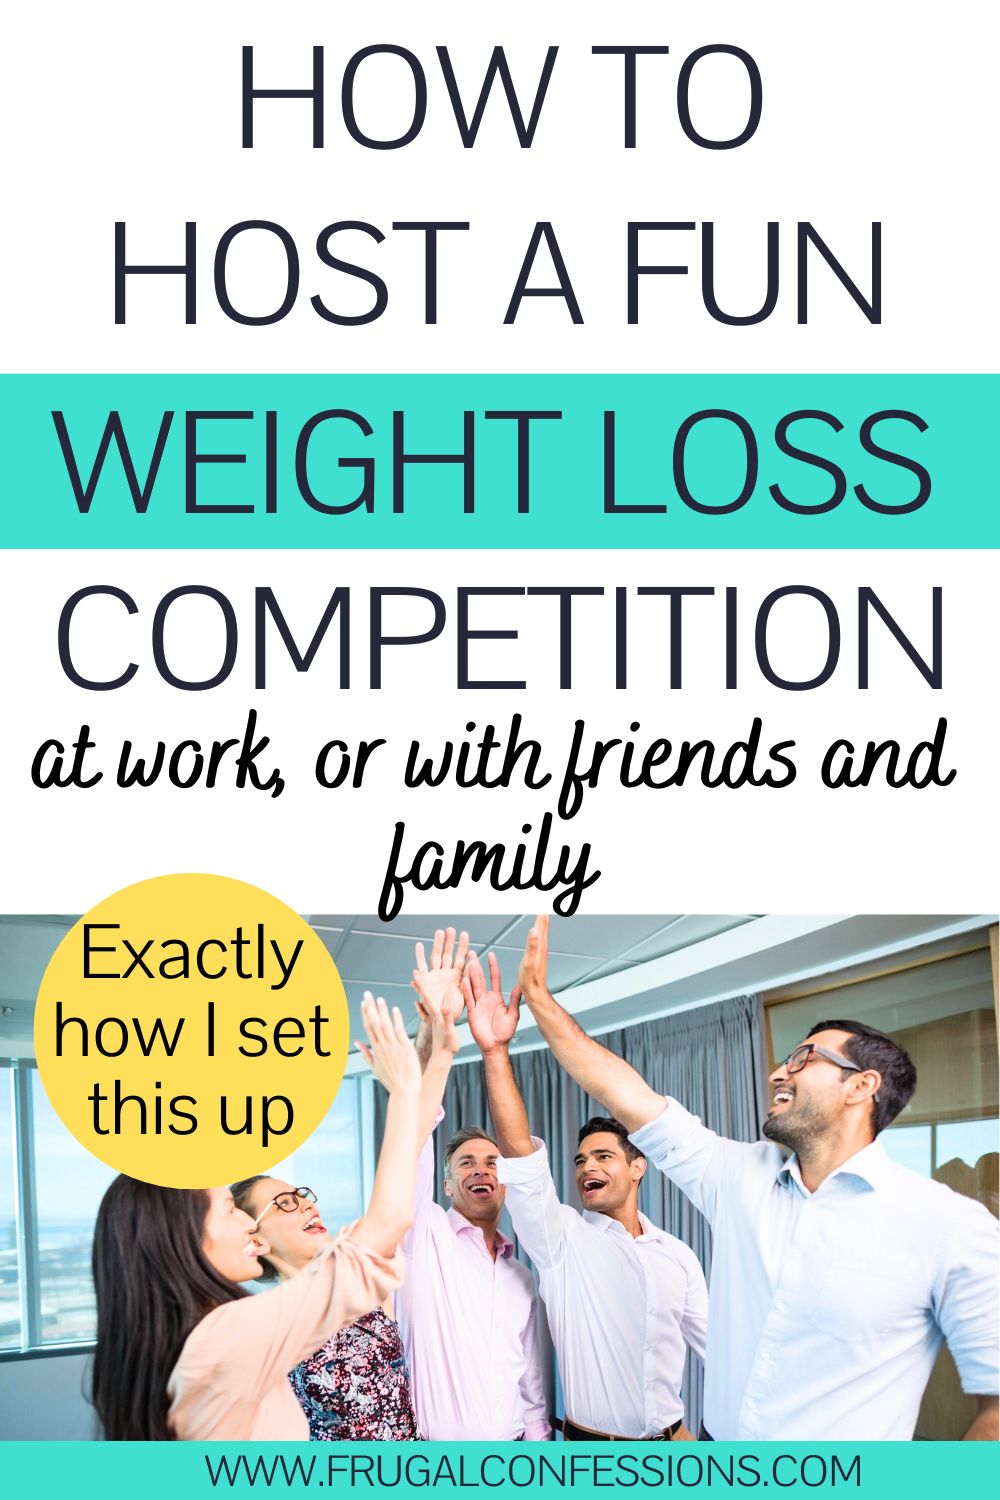 group of coworkers giving high fives, text overlay "how to host a fun weight loss competition"